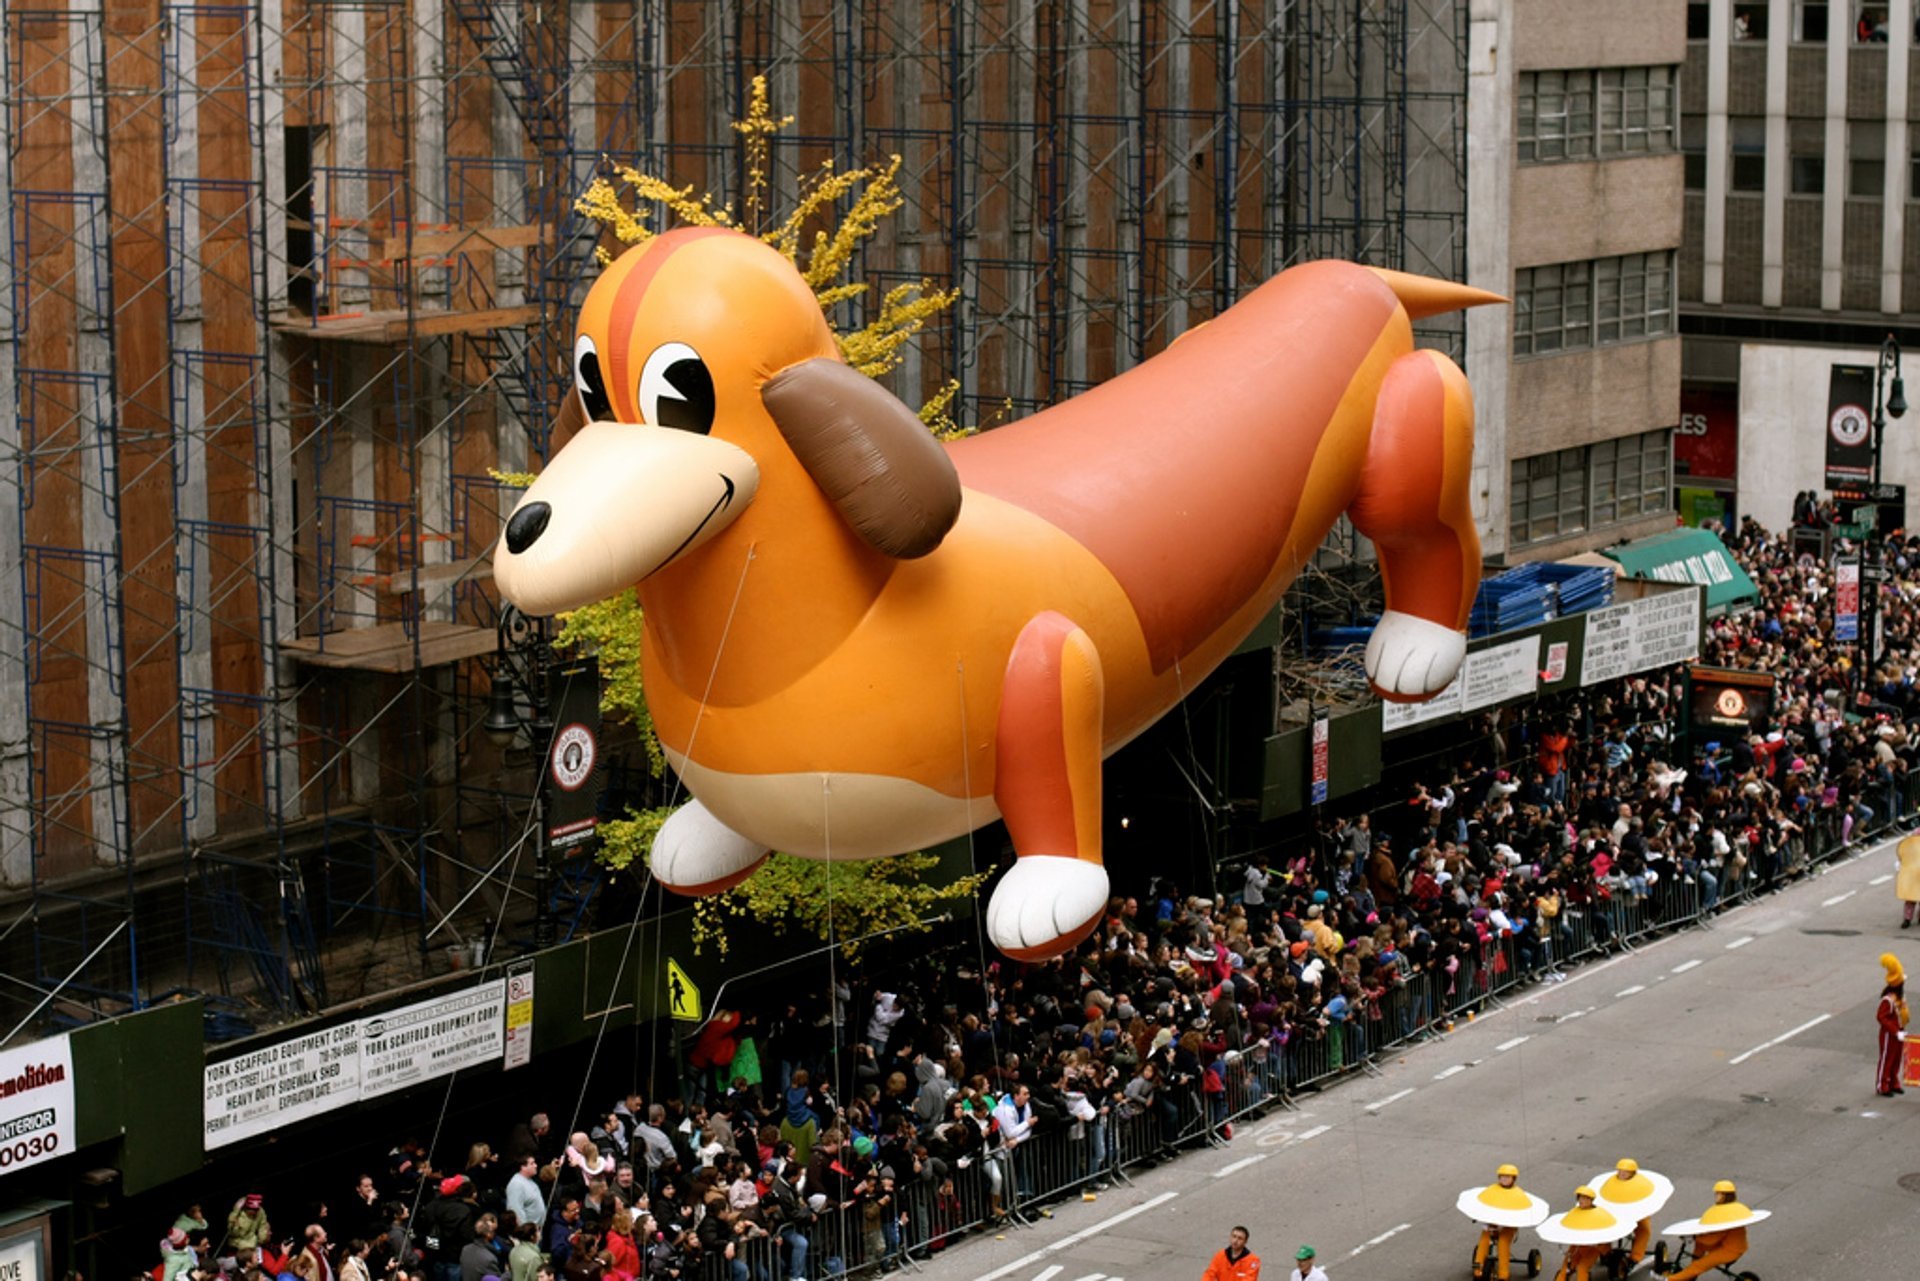 Macy's Thanksgiving Day Parade in New York City (NYC), 2021